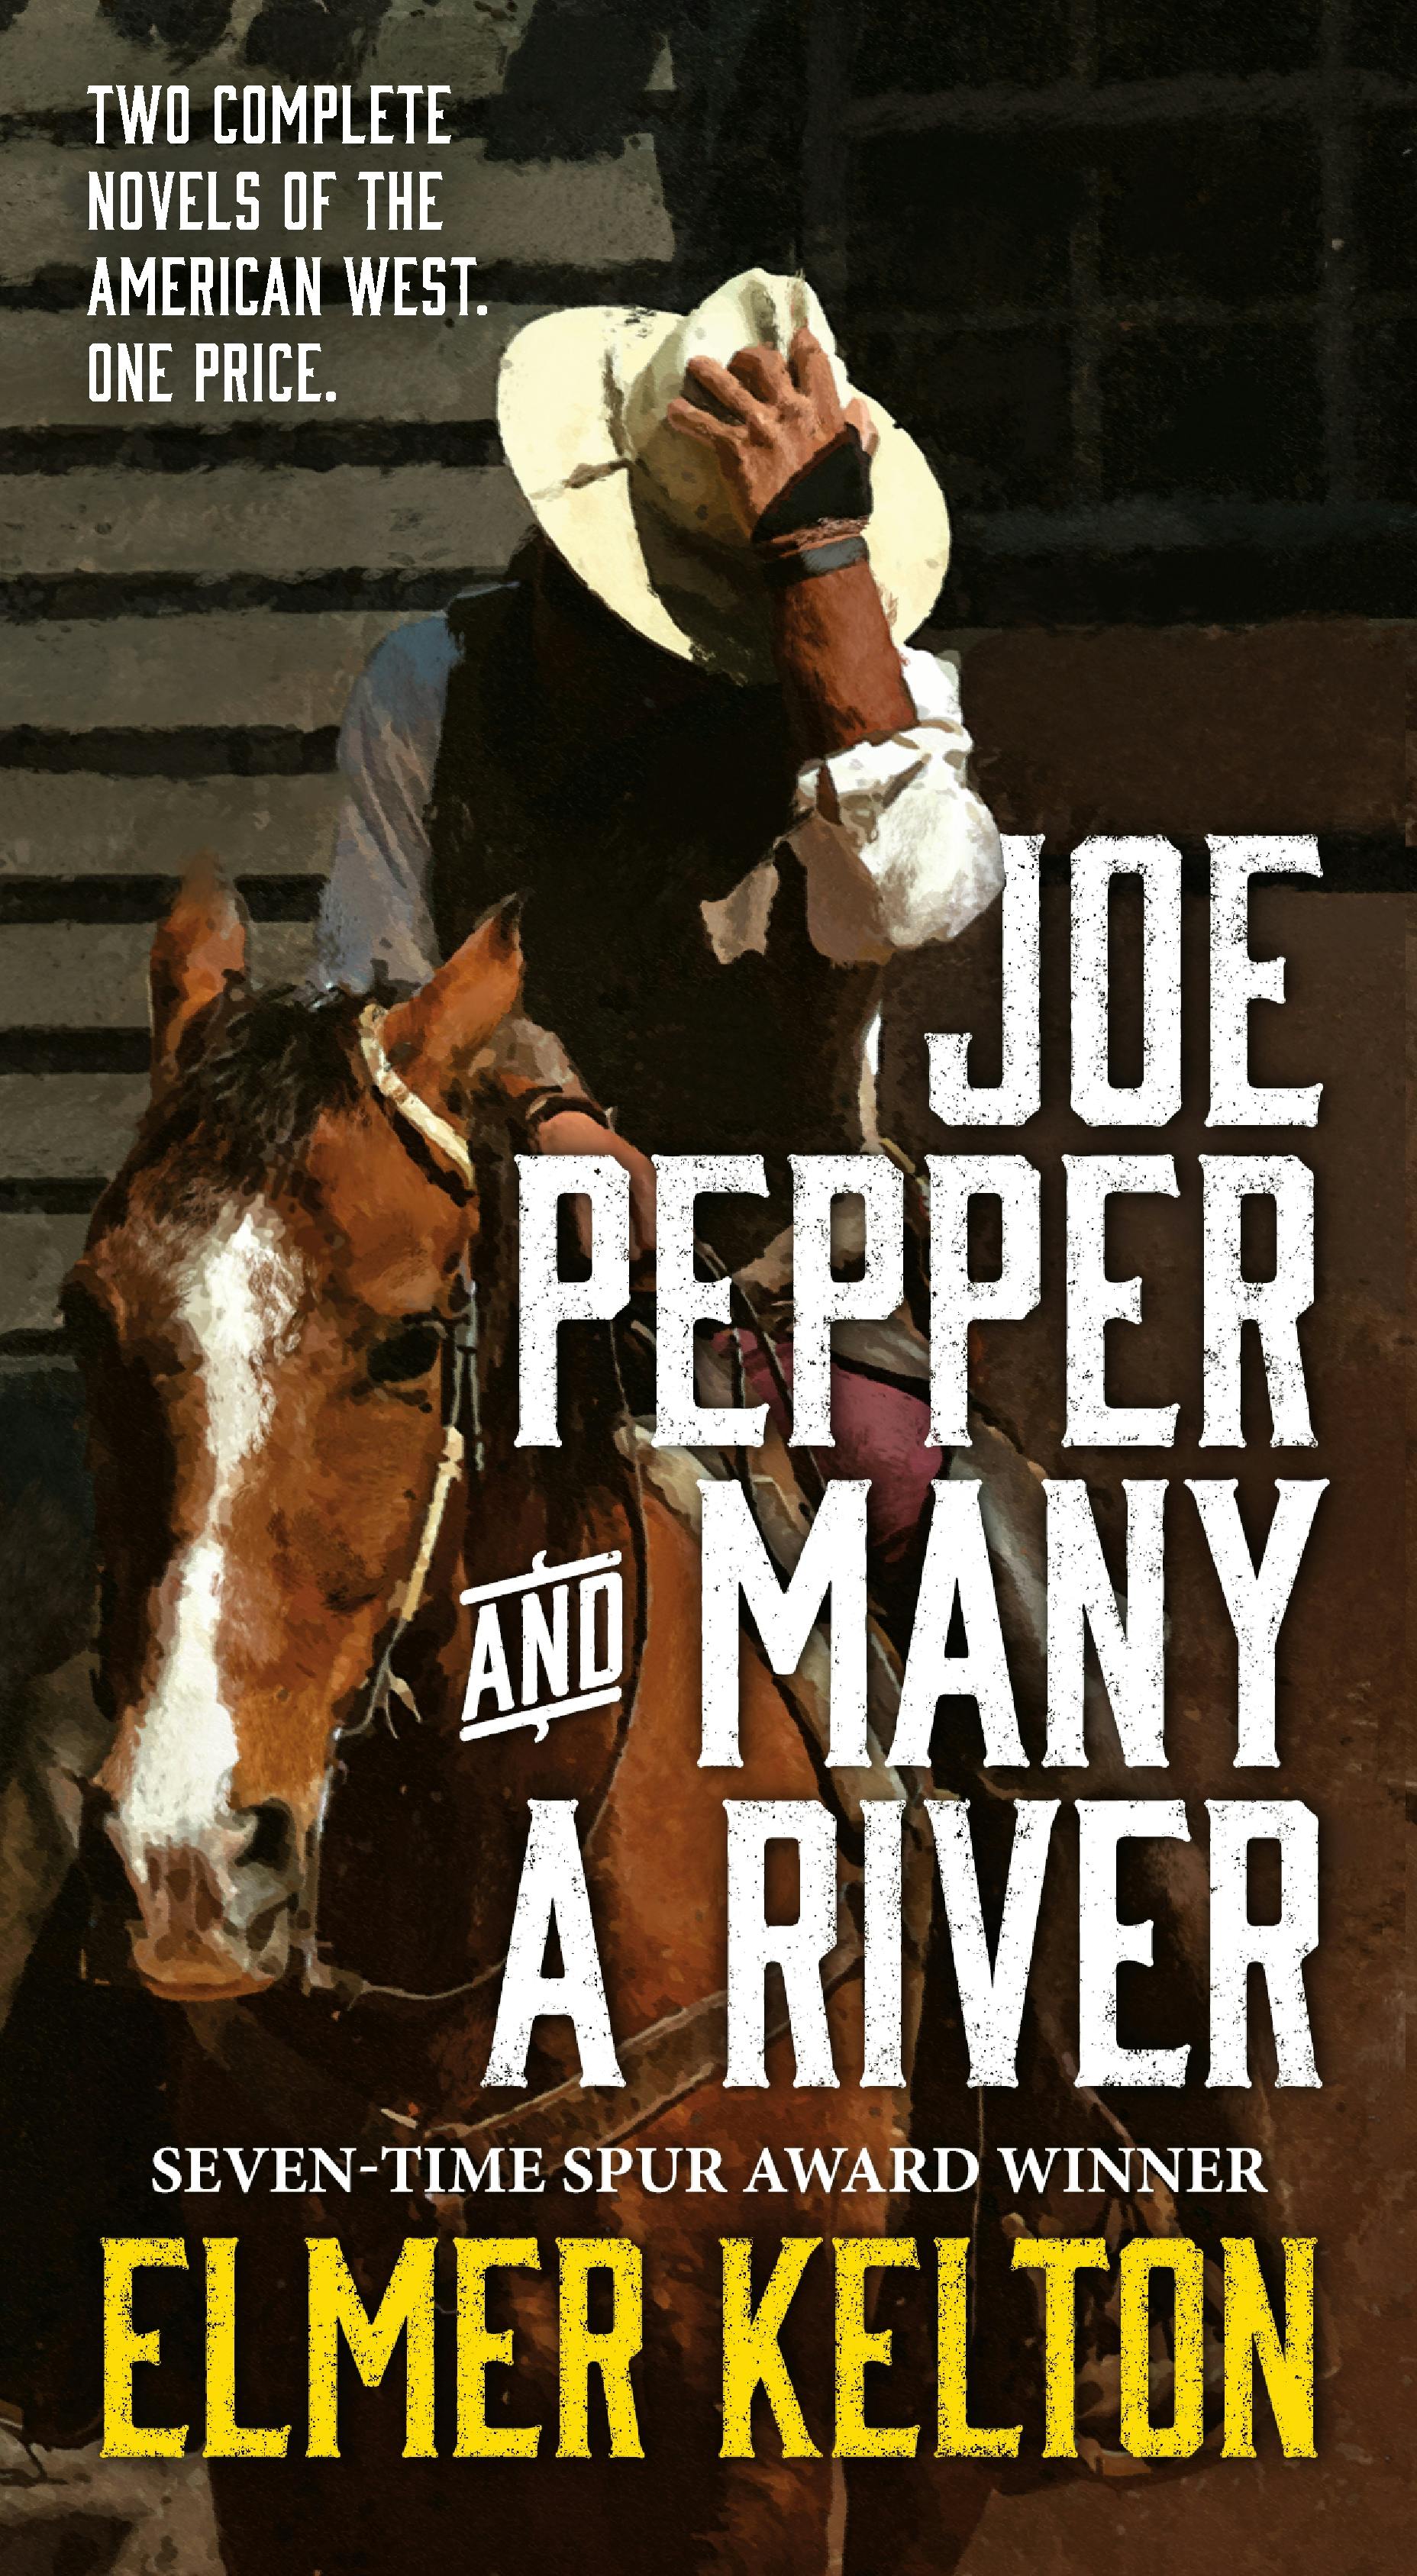 Cover for the book titled as: Joe Pepper and Many a River